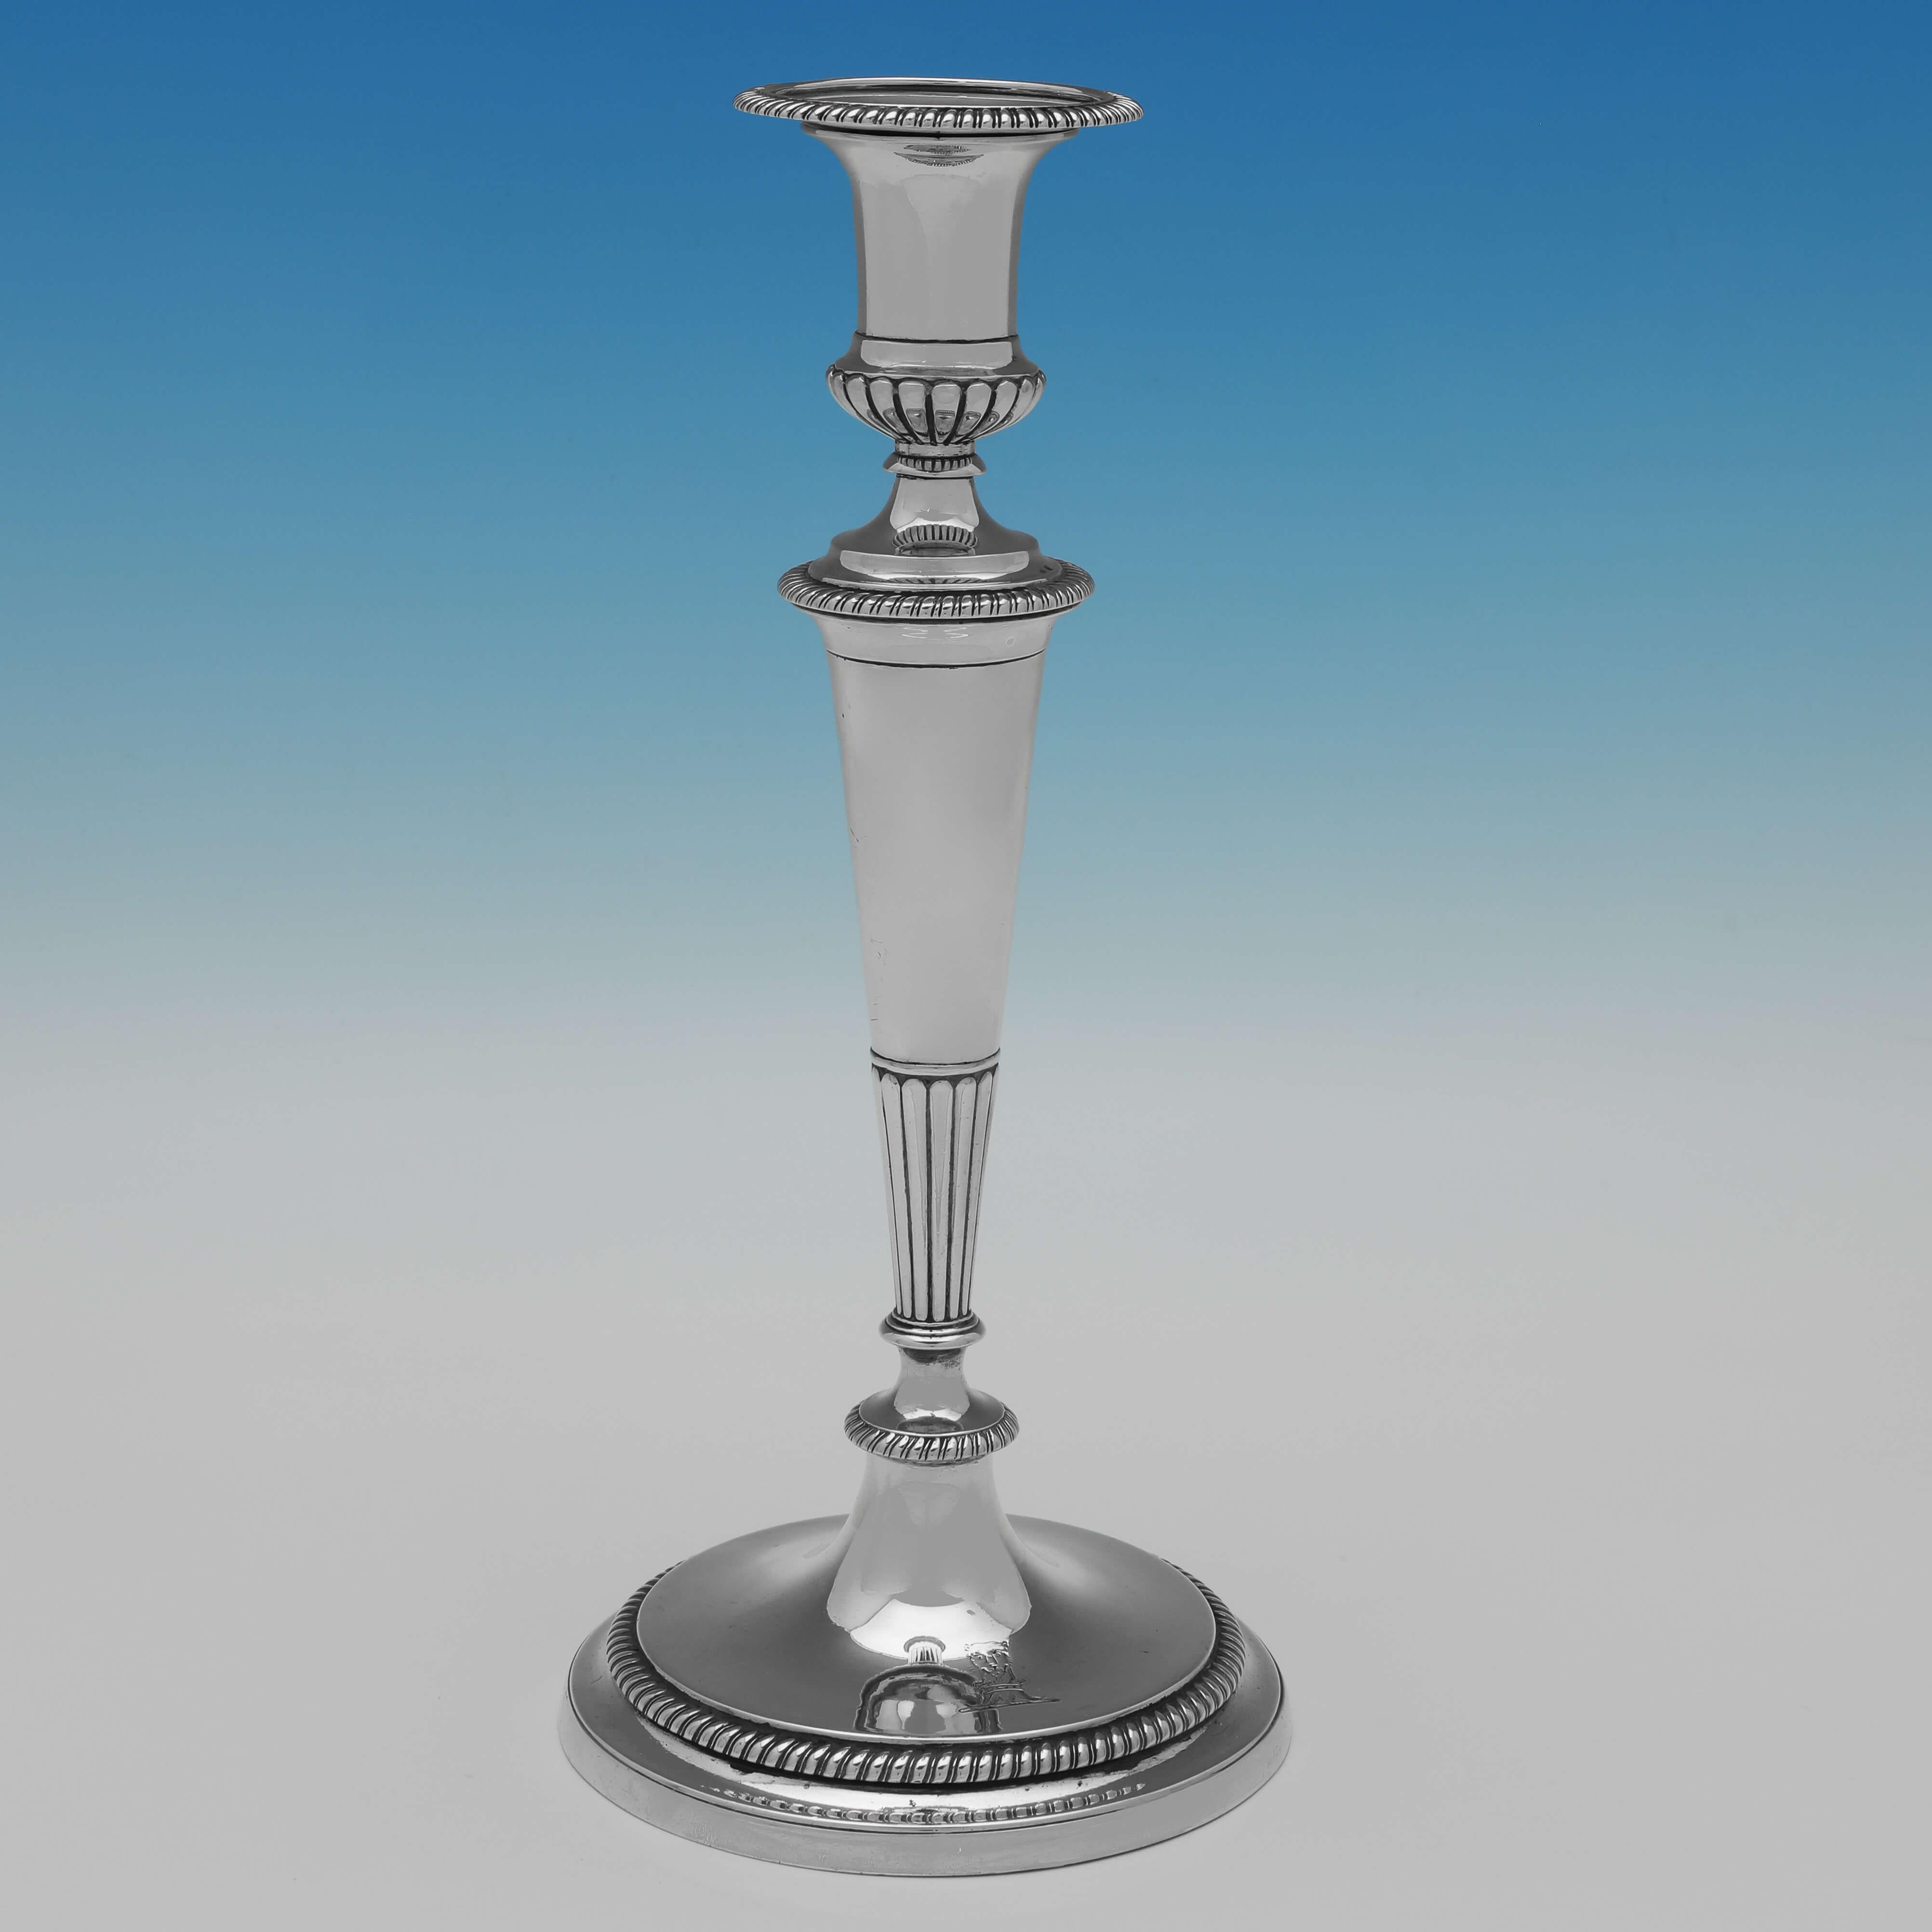 Hallmarked in London in 1798 by the master candlestick maker John Scofield, this important set of four Neoclassical, Antique Sterling Silver Candlesticks, show the refined elegance Scofield was famous for. 
Unlike most candlesticks of this period